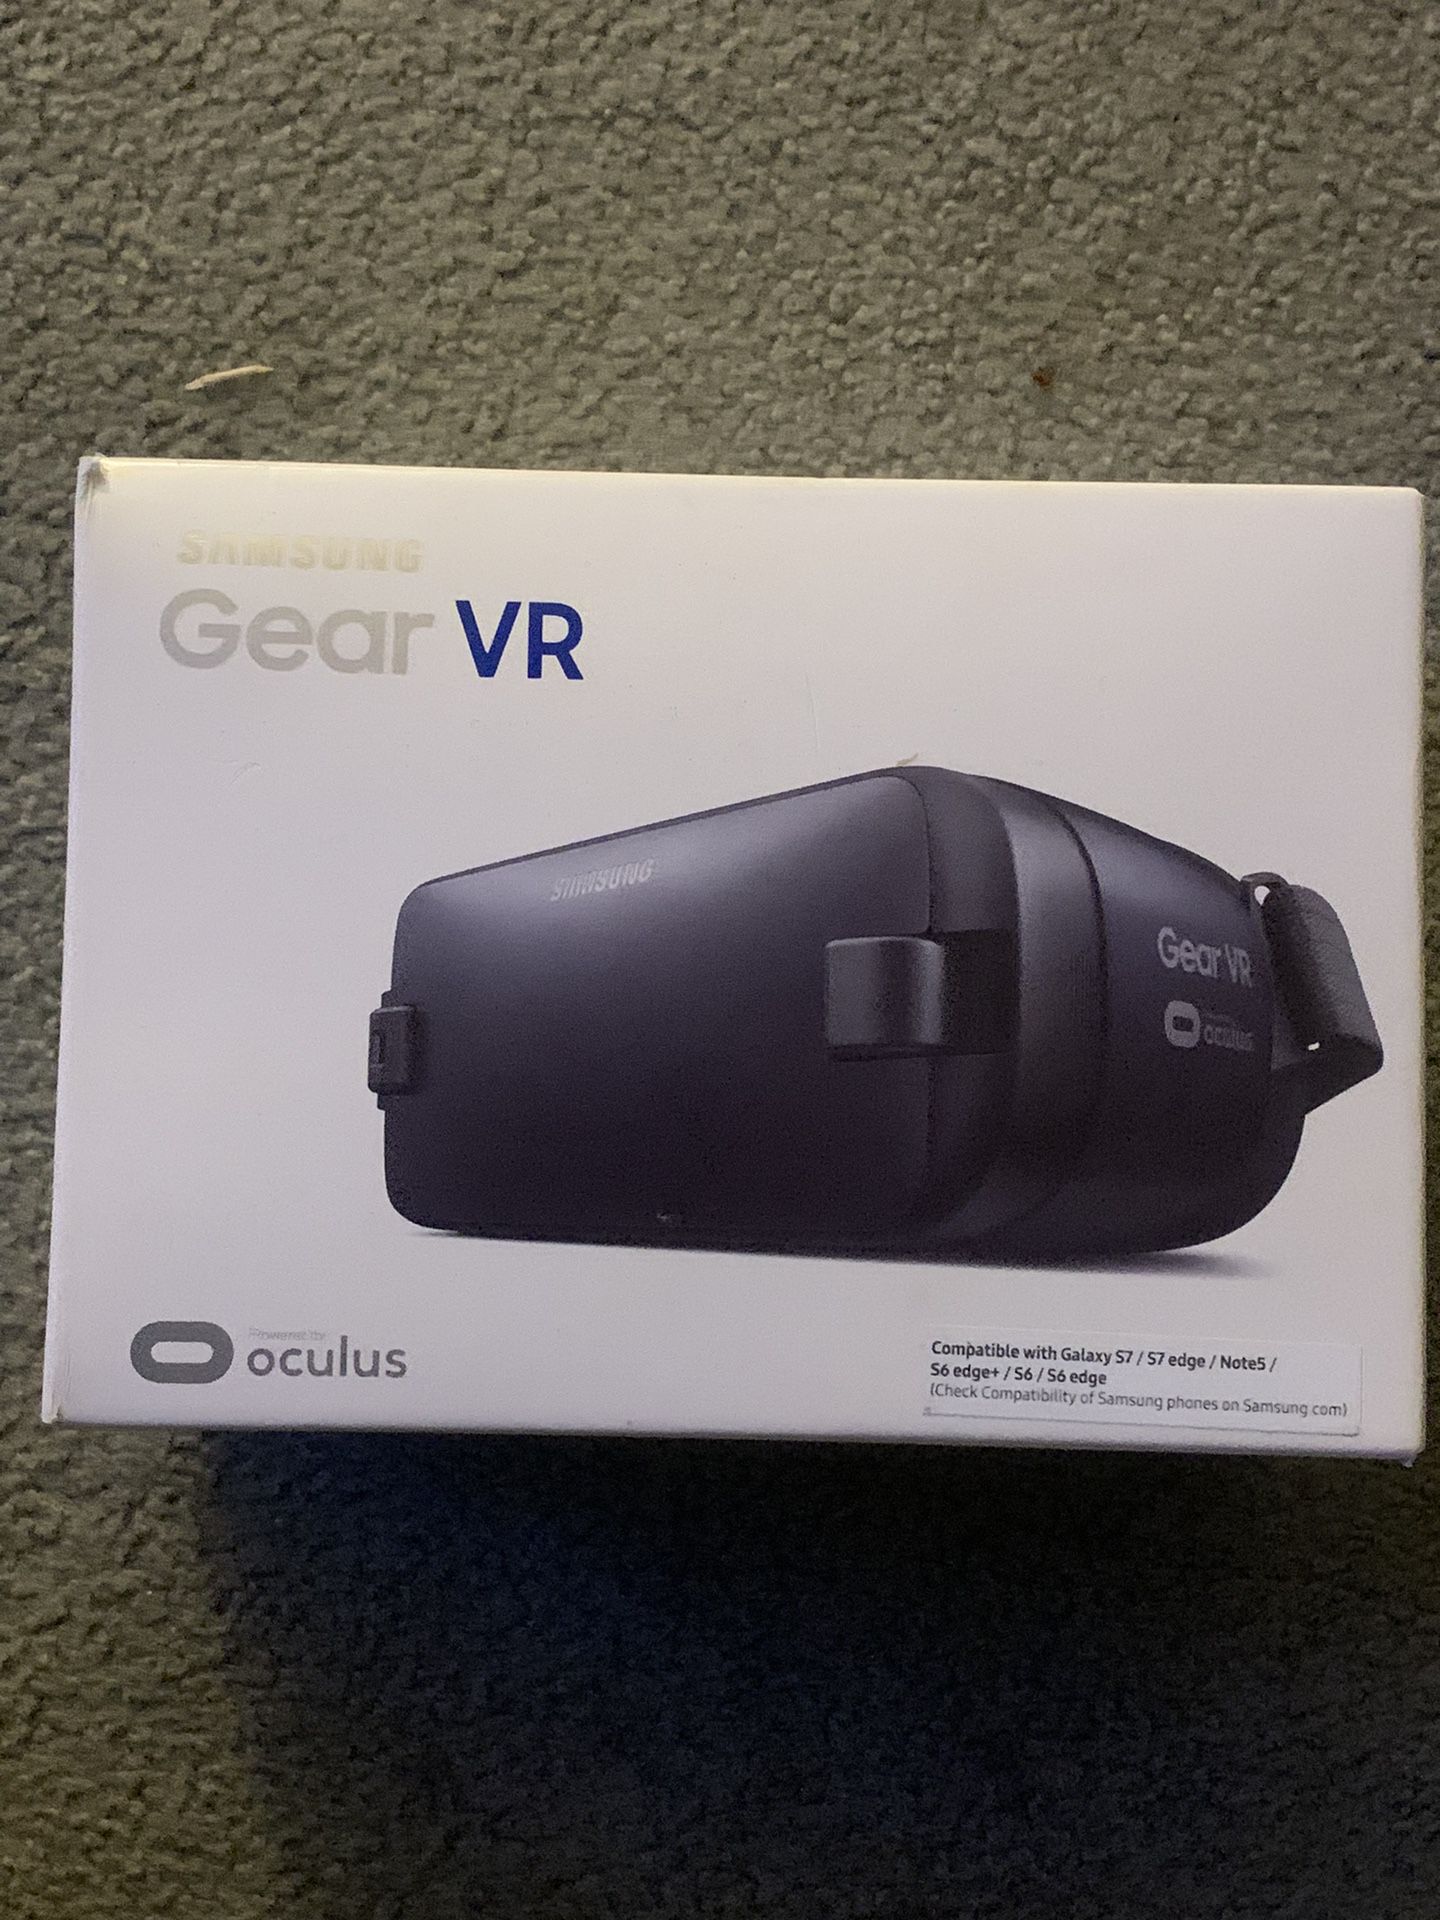 Samsung Gear VR w/Controller - US Version - Discontinued by Manufacturer